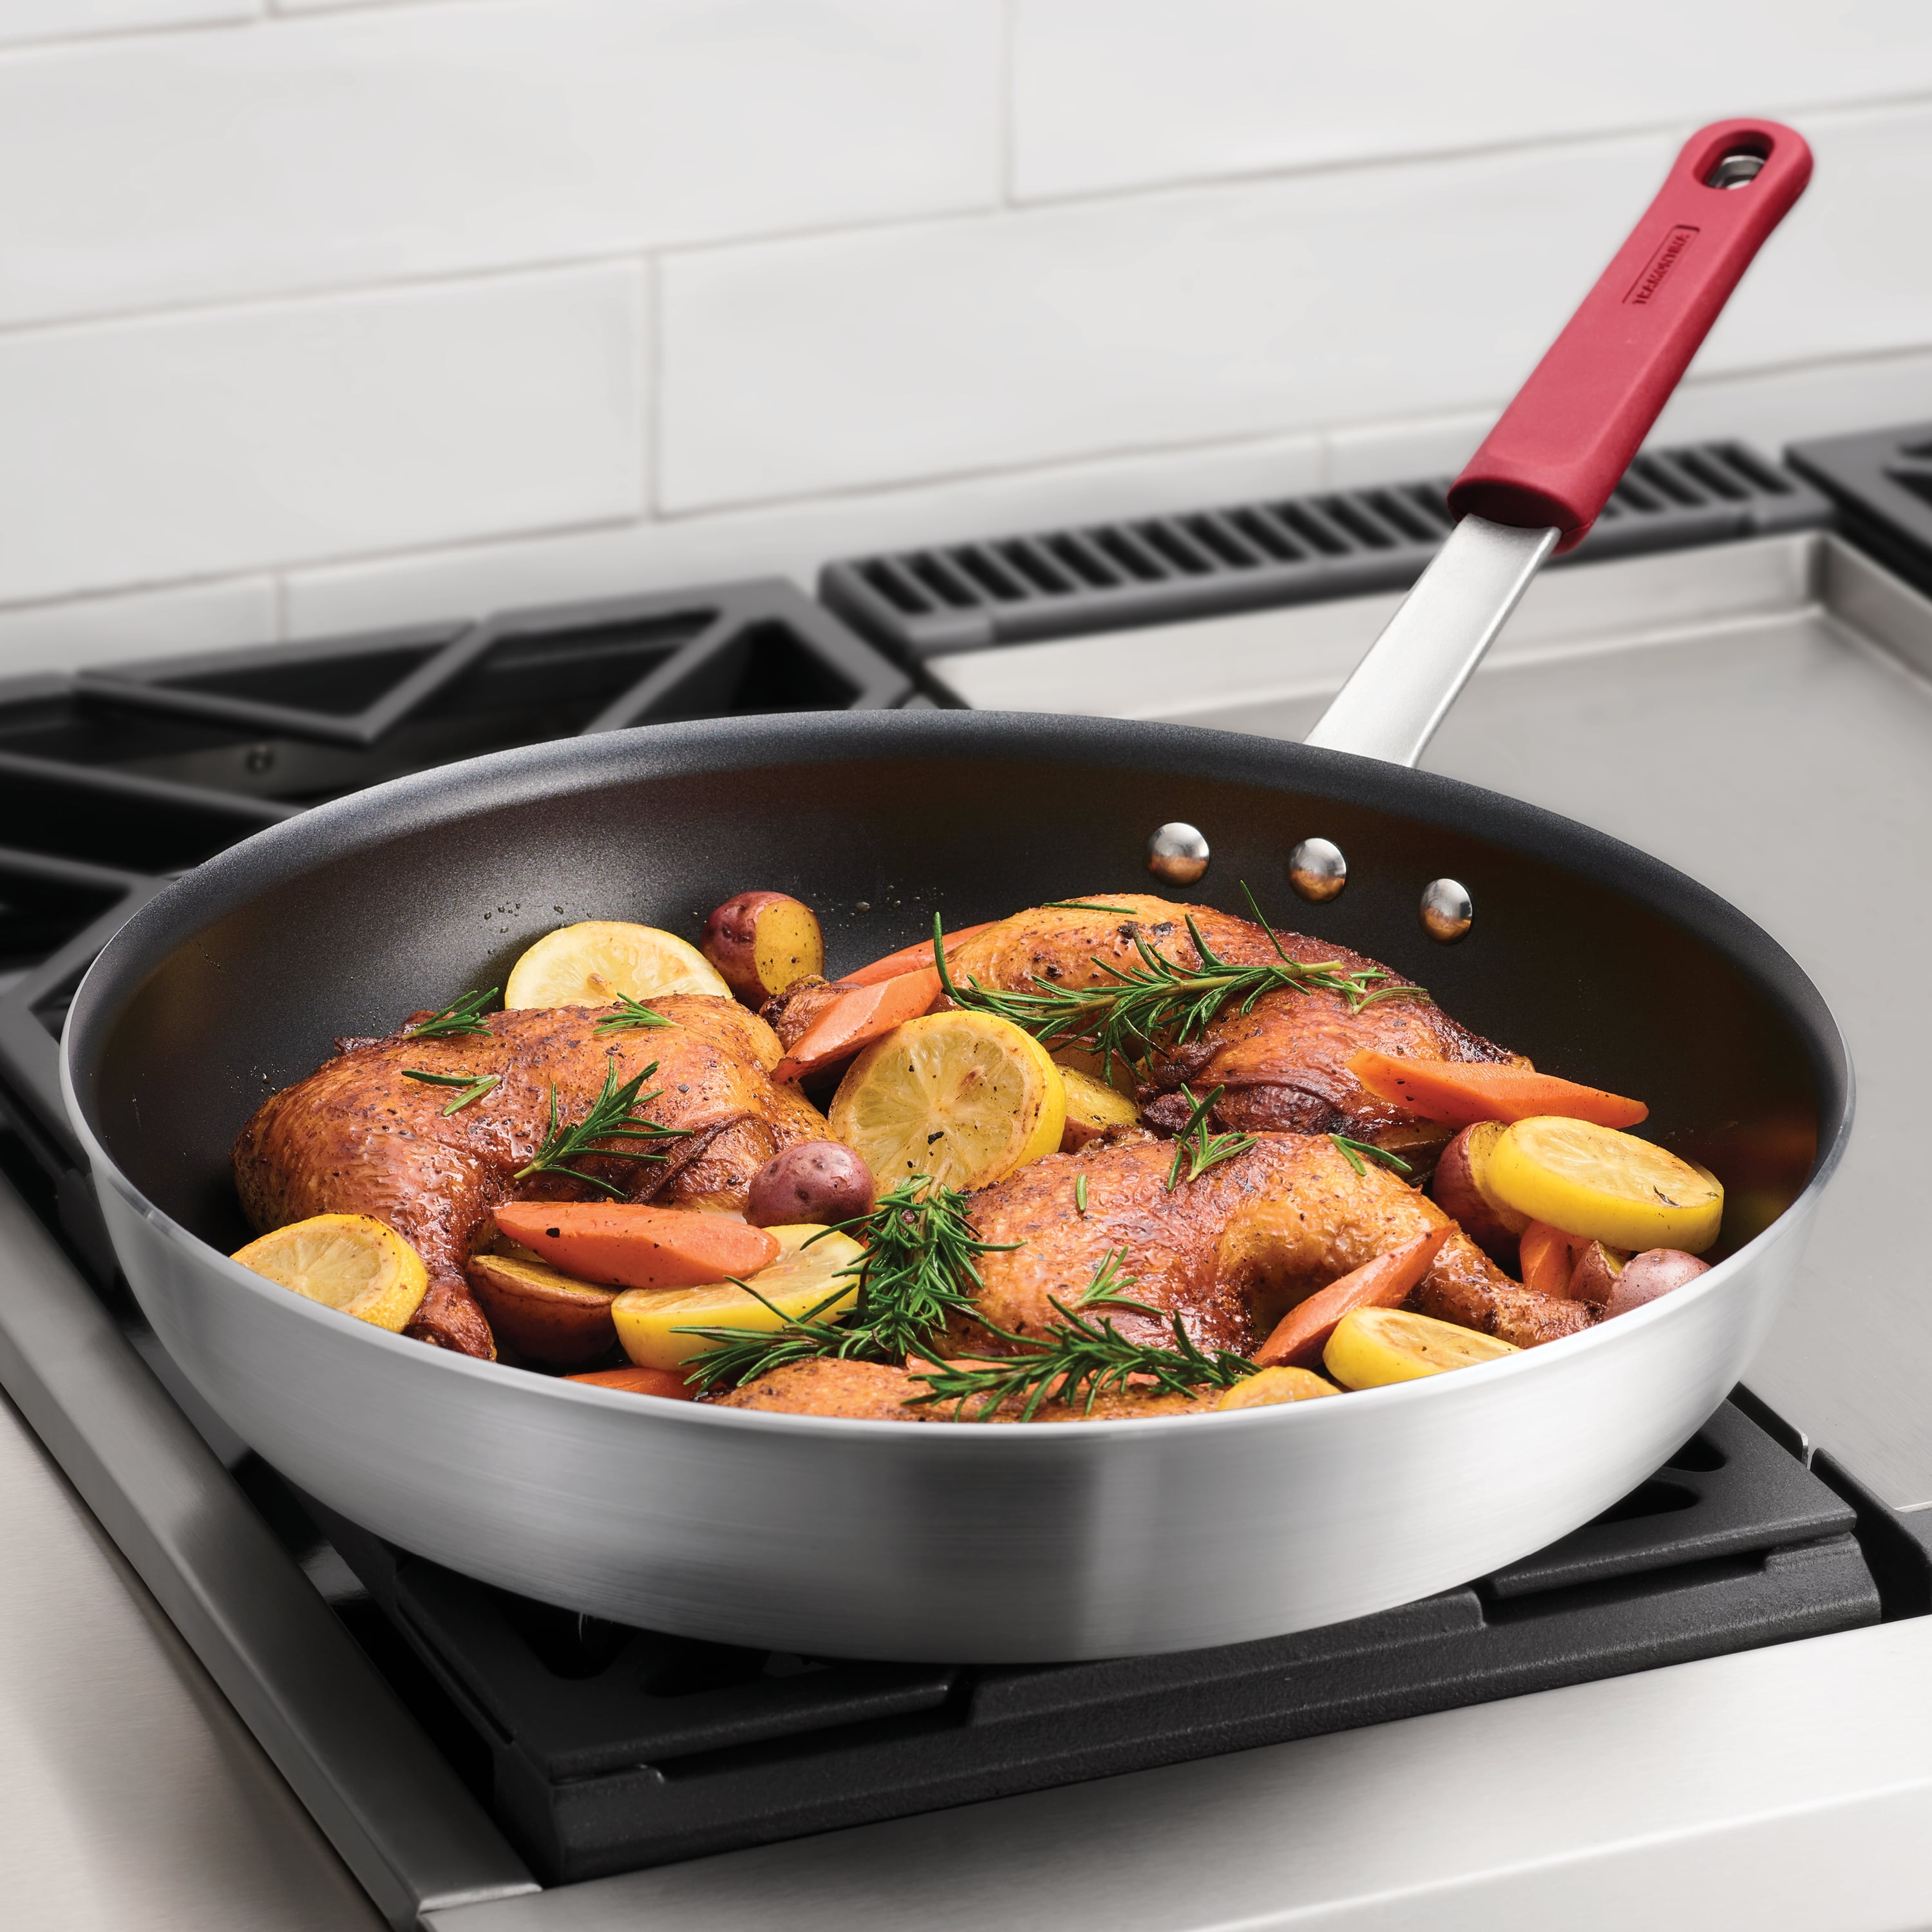 NutriChef 14 in. Ceramic Non-stick Frying Pan in White NCHG14 - The Home  Depot